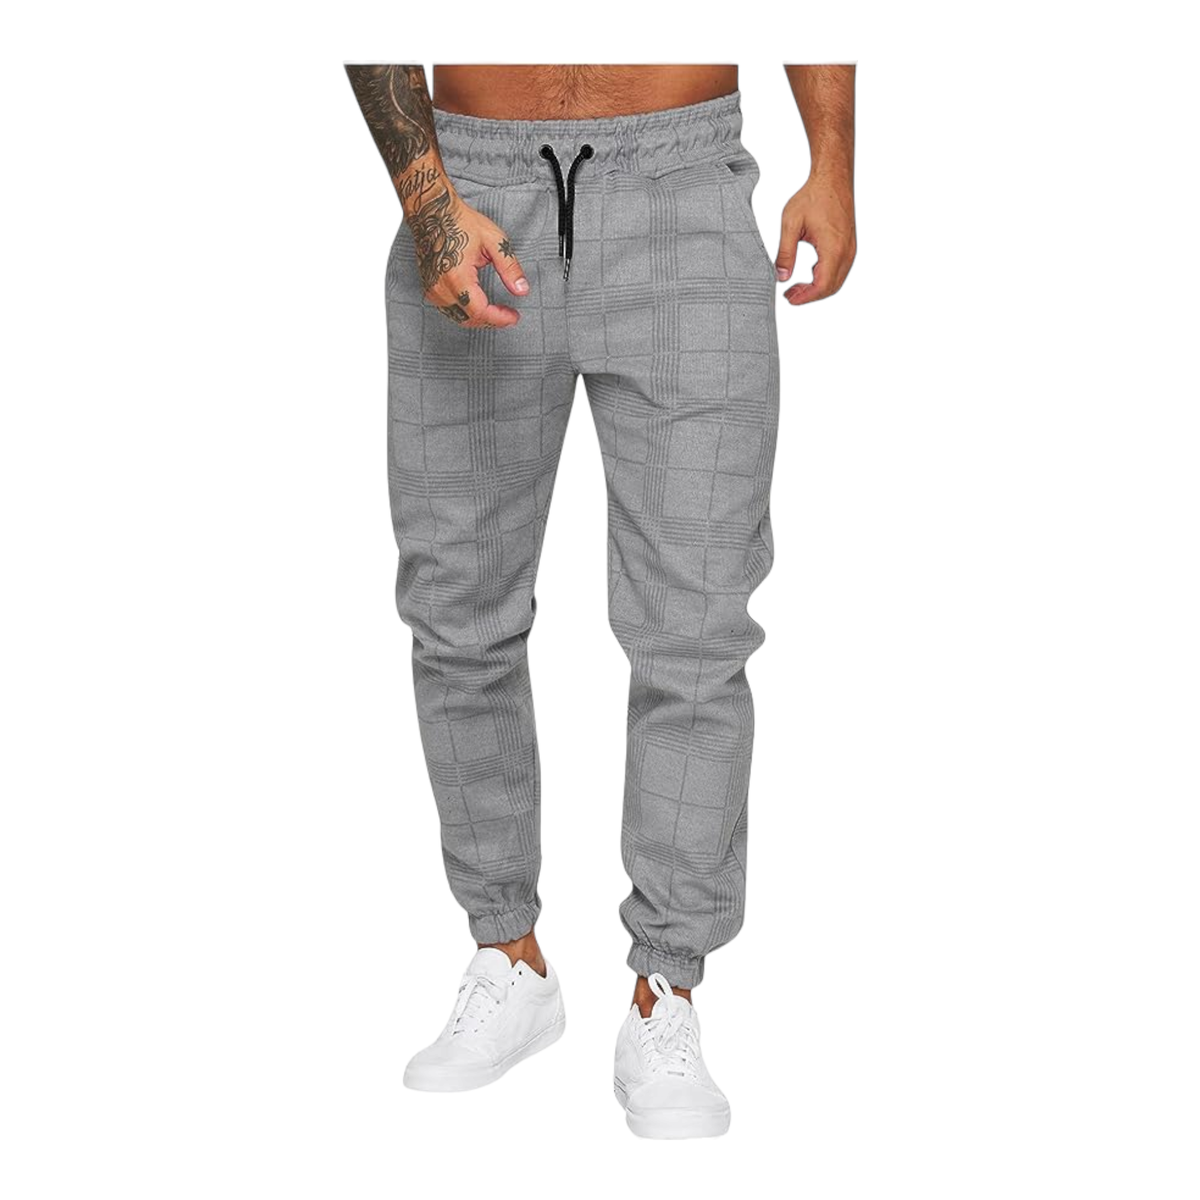 Checkered Joggers For Men Tapered Cargo Pants Gym Sweatpants - APEY ...